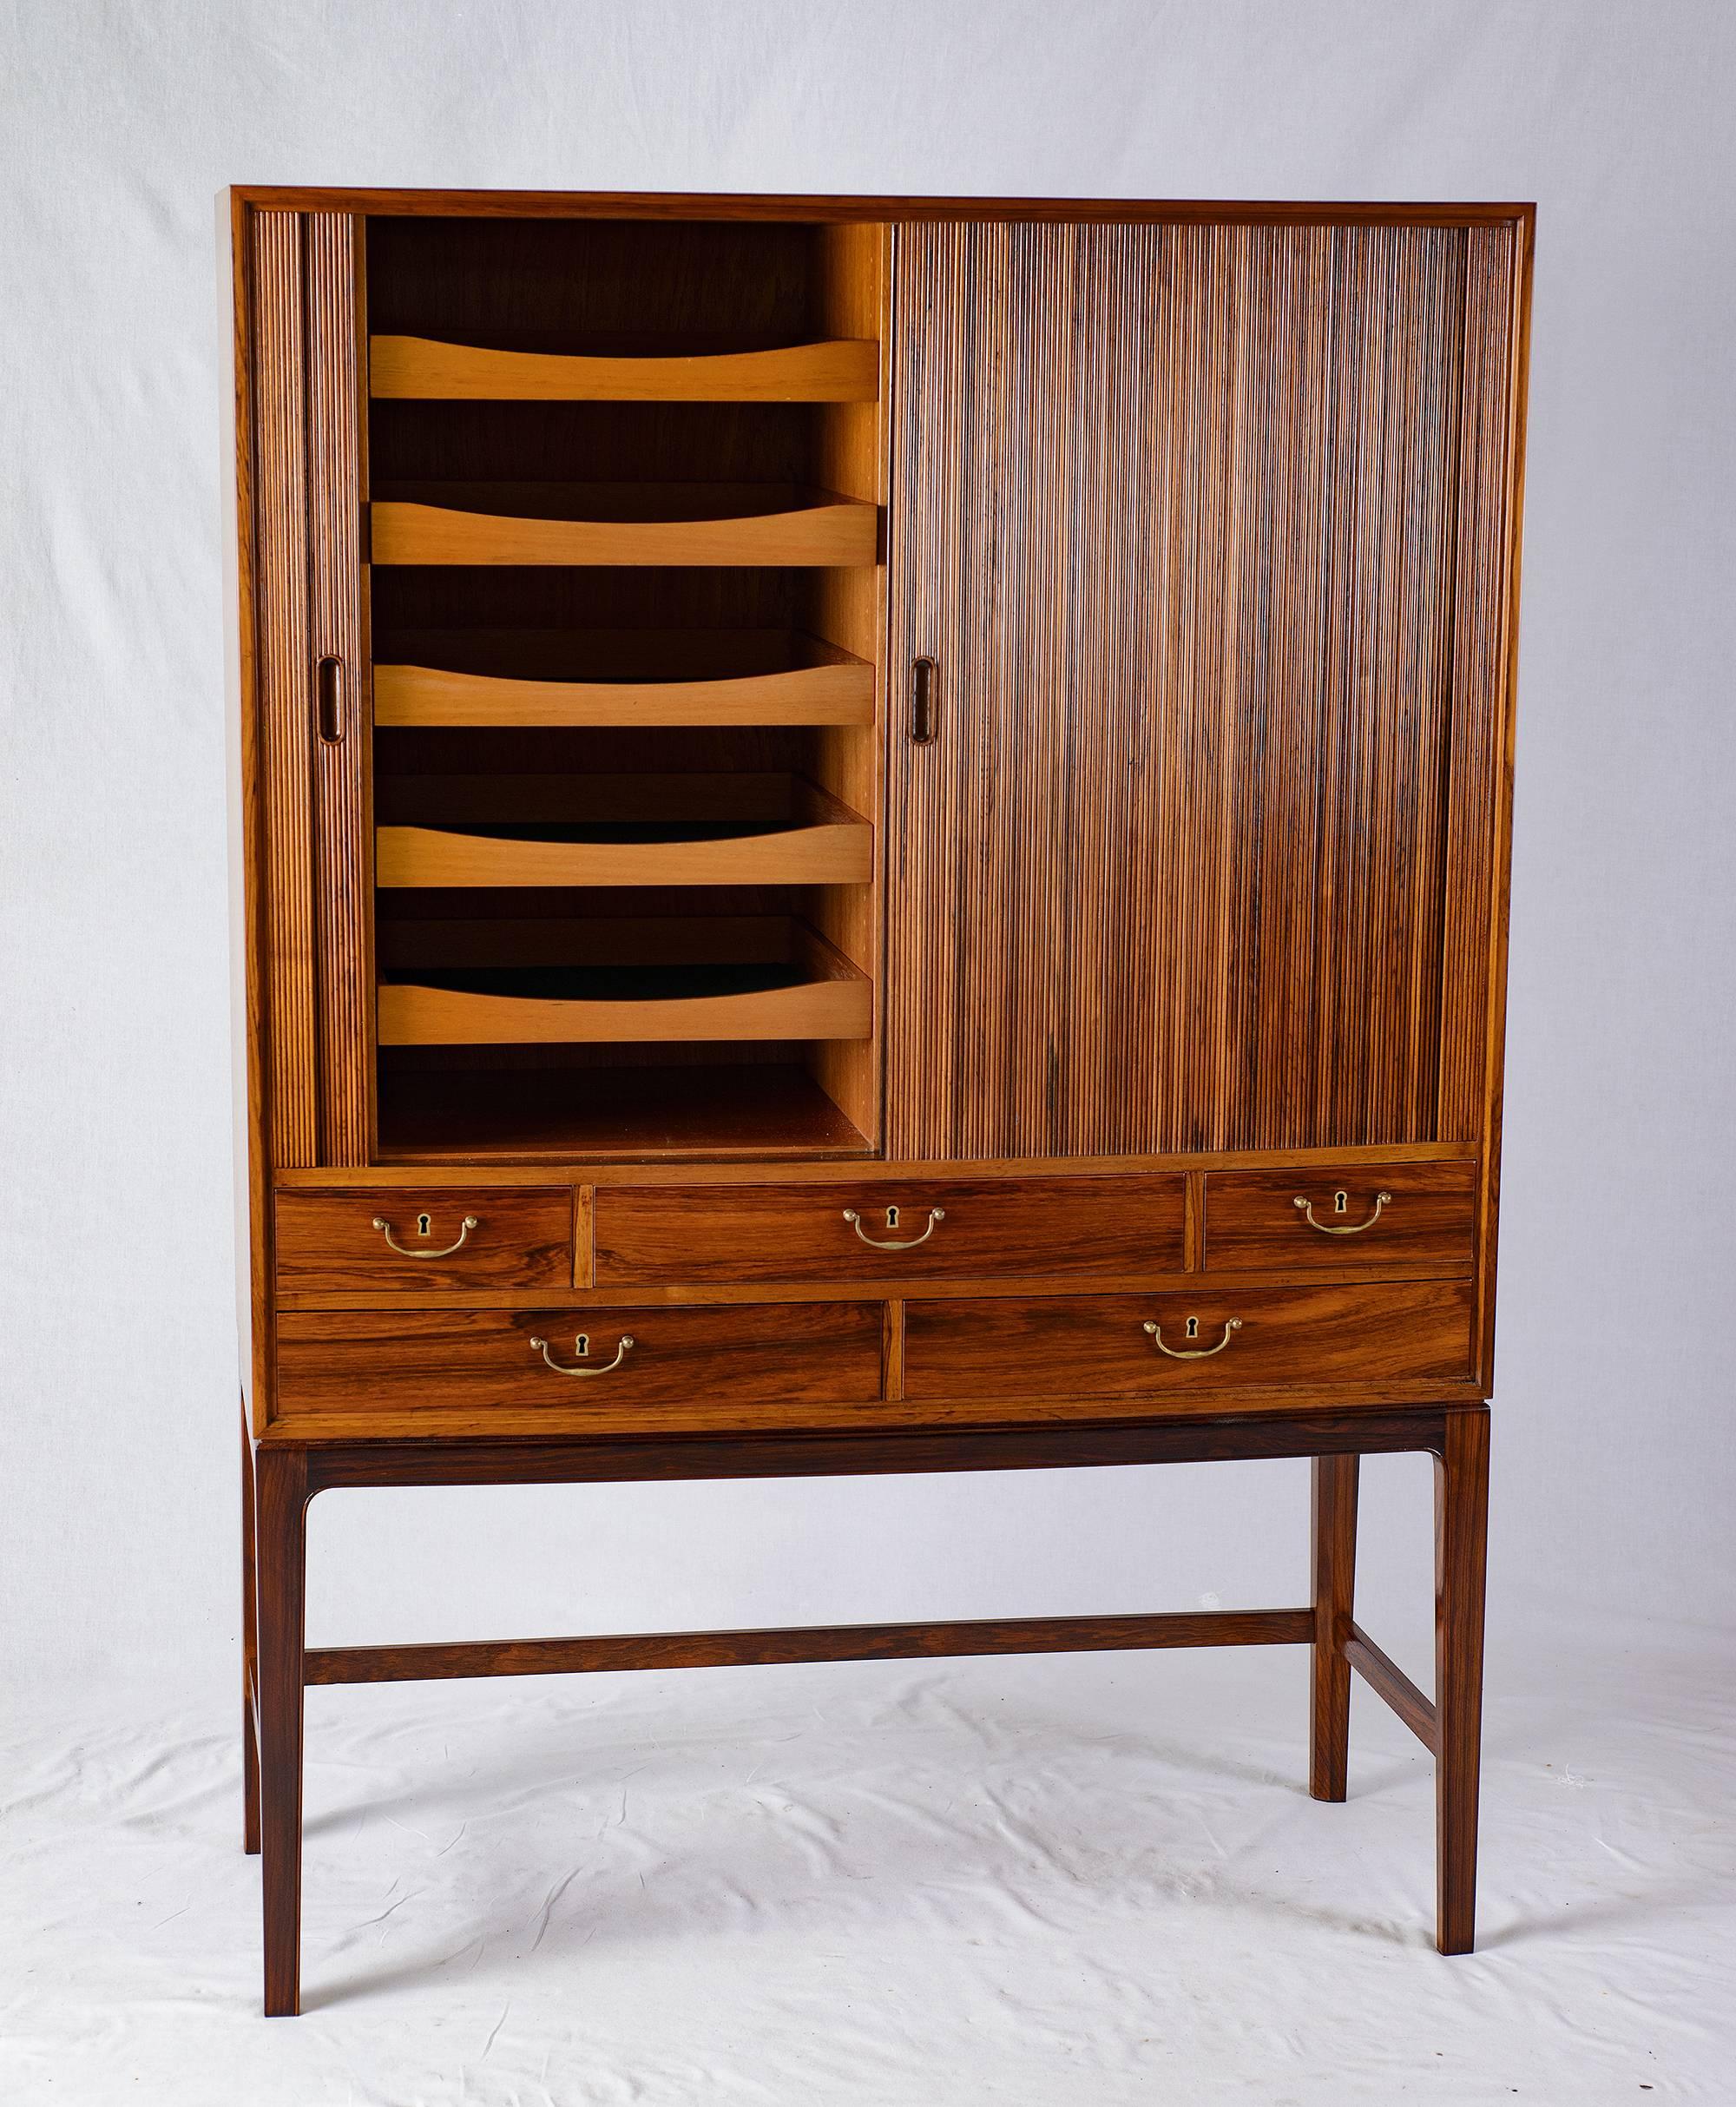 Ole Wanscher rosewood tambour cabinet produced by master cabinetmaker A. J. Iversen.